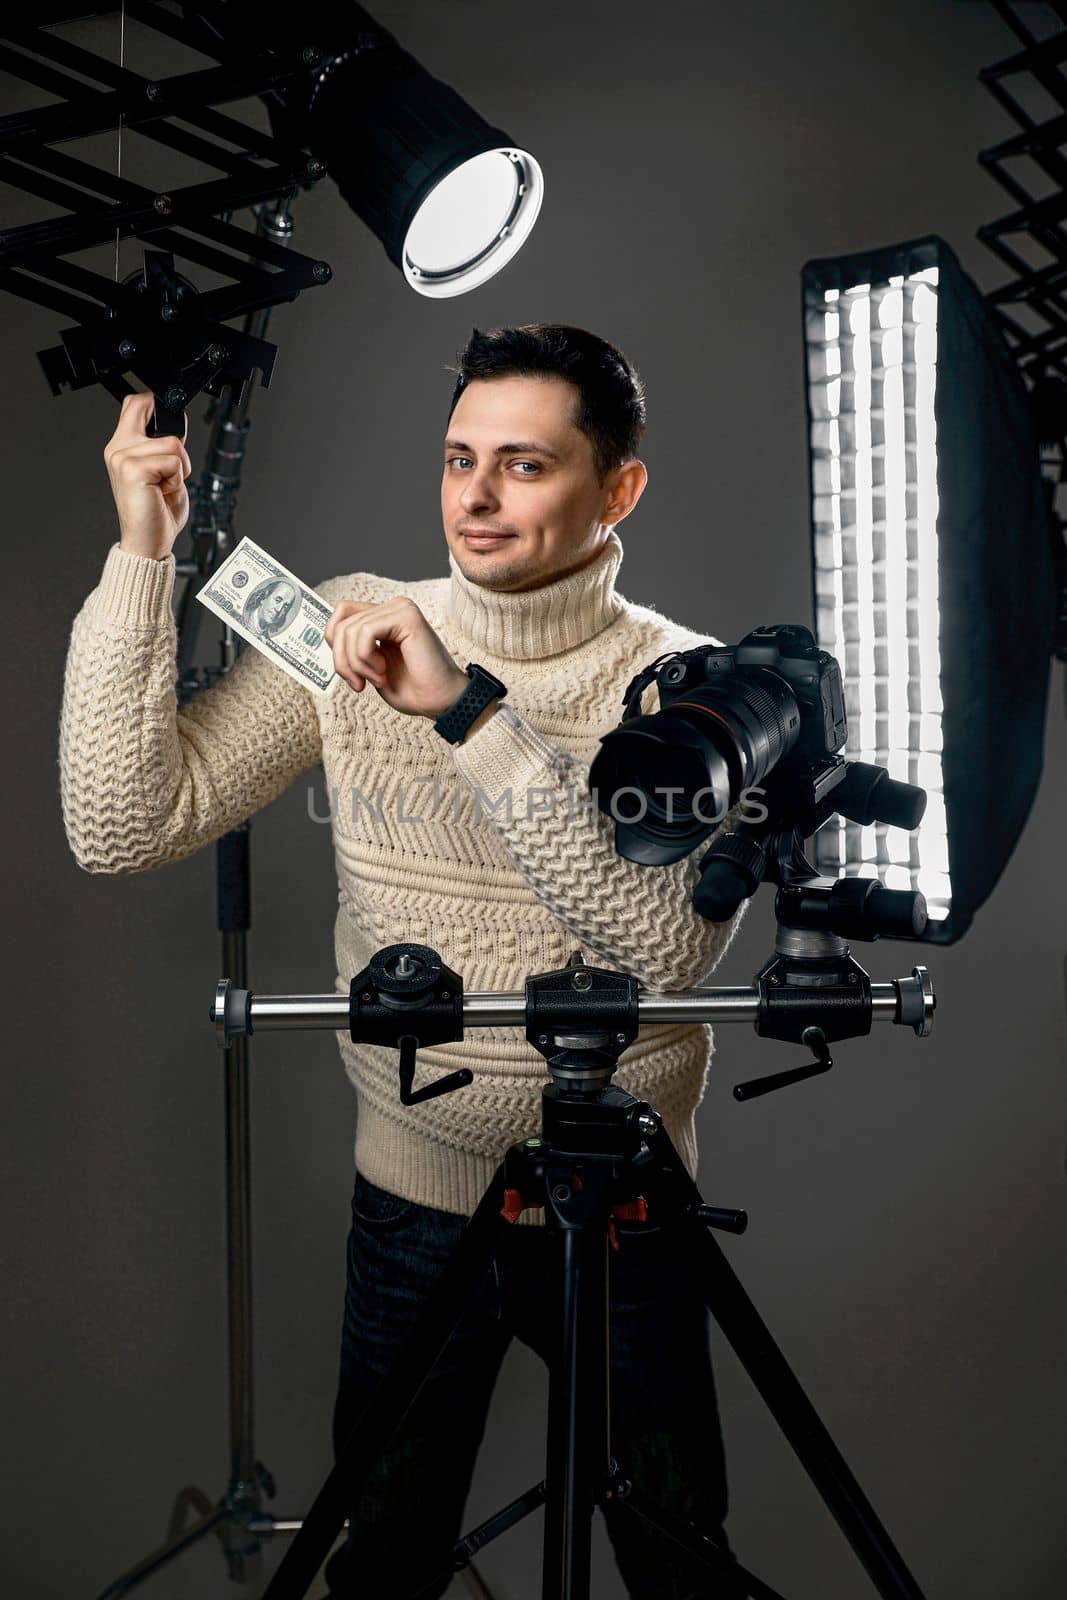 Professional caucasian photographer with digital camera on tripod holding hundred dollar bills on gray background with lighting equipment